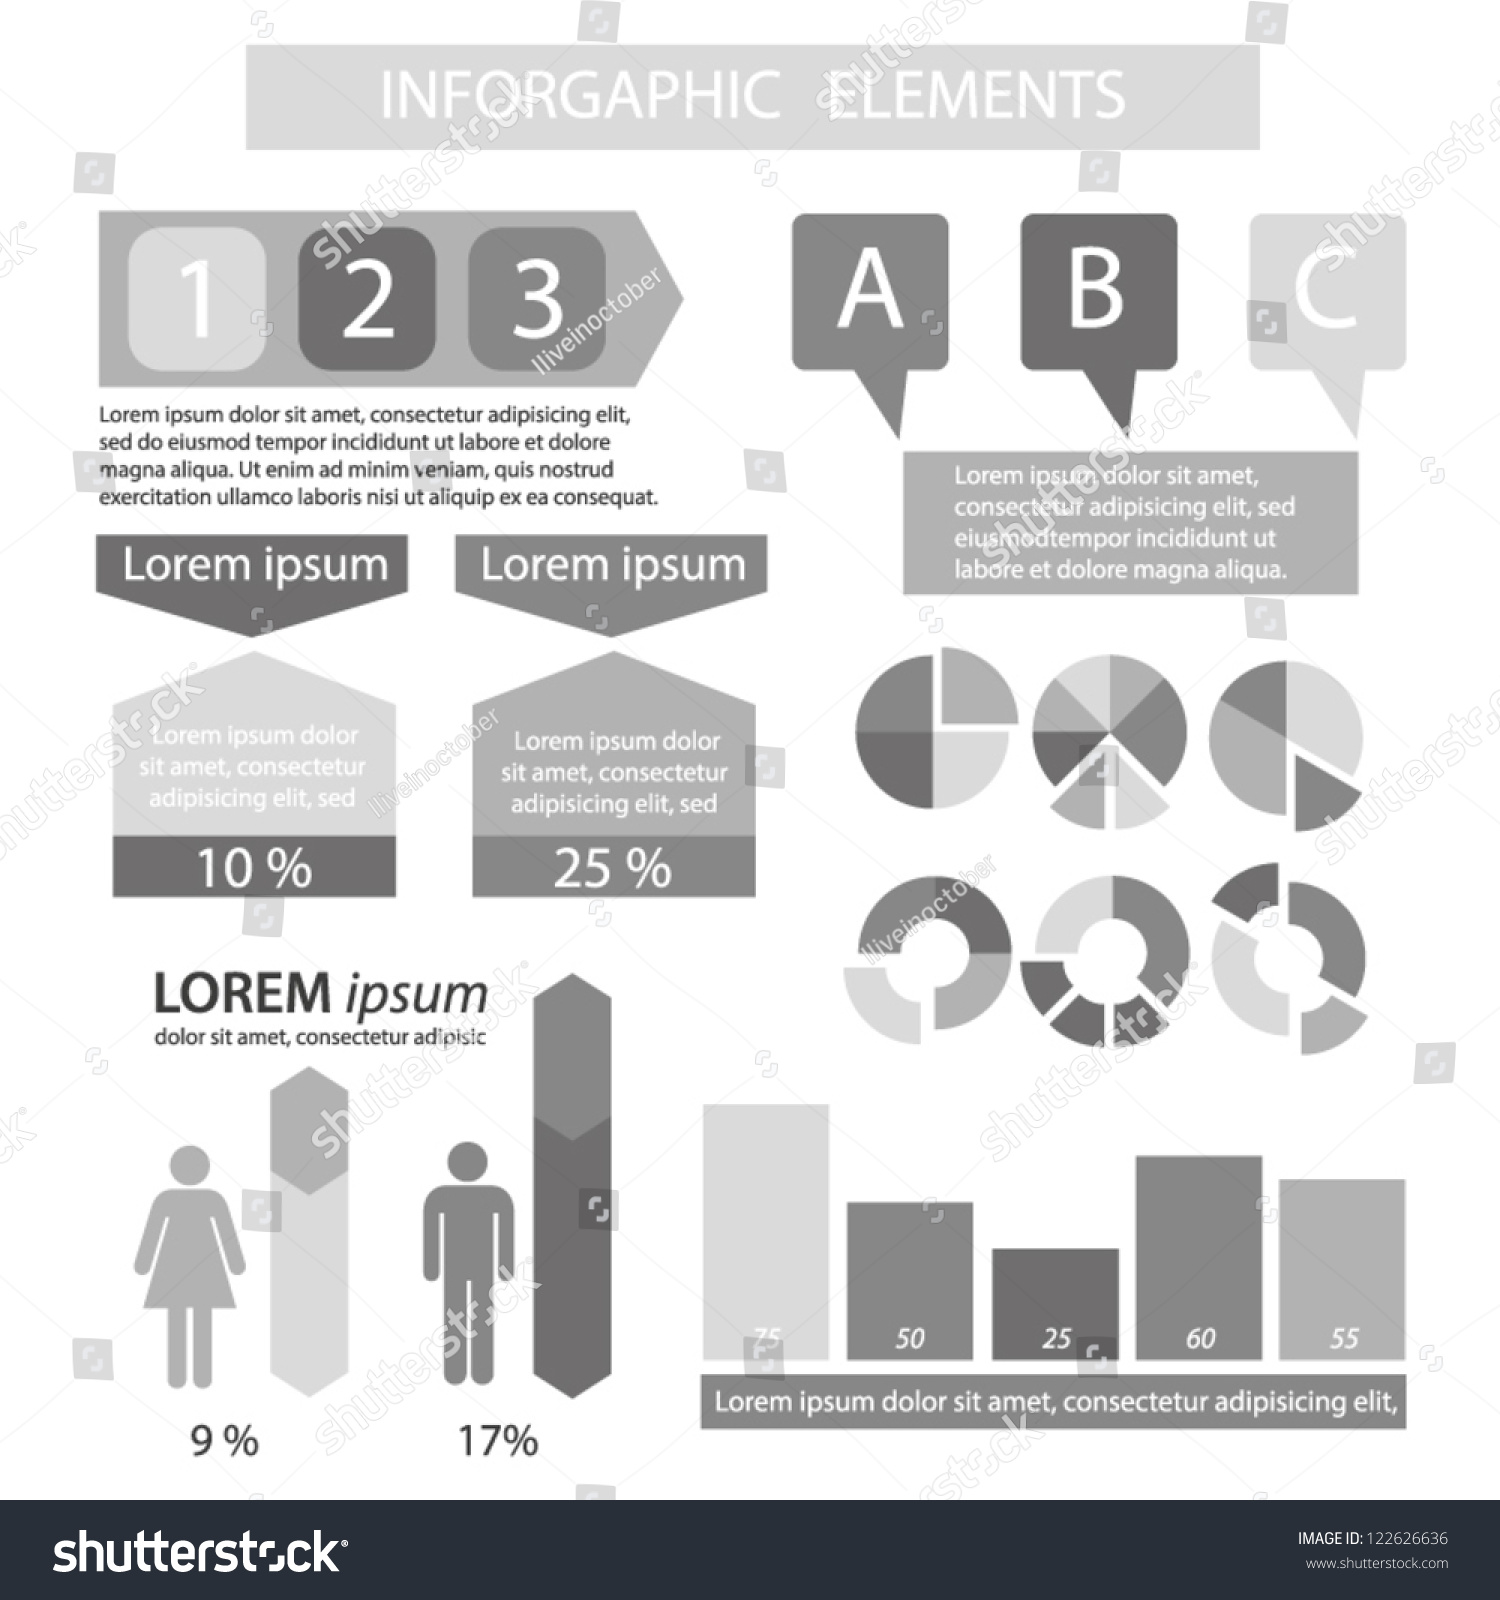 Infographic Templates For Business. Black And White Flat Vector Stock Vector - Illustration of ...